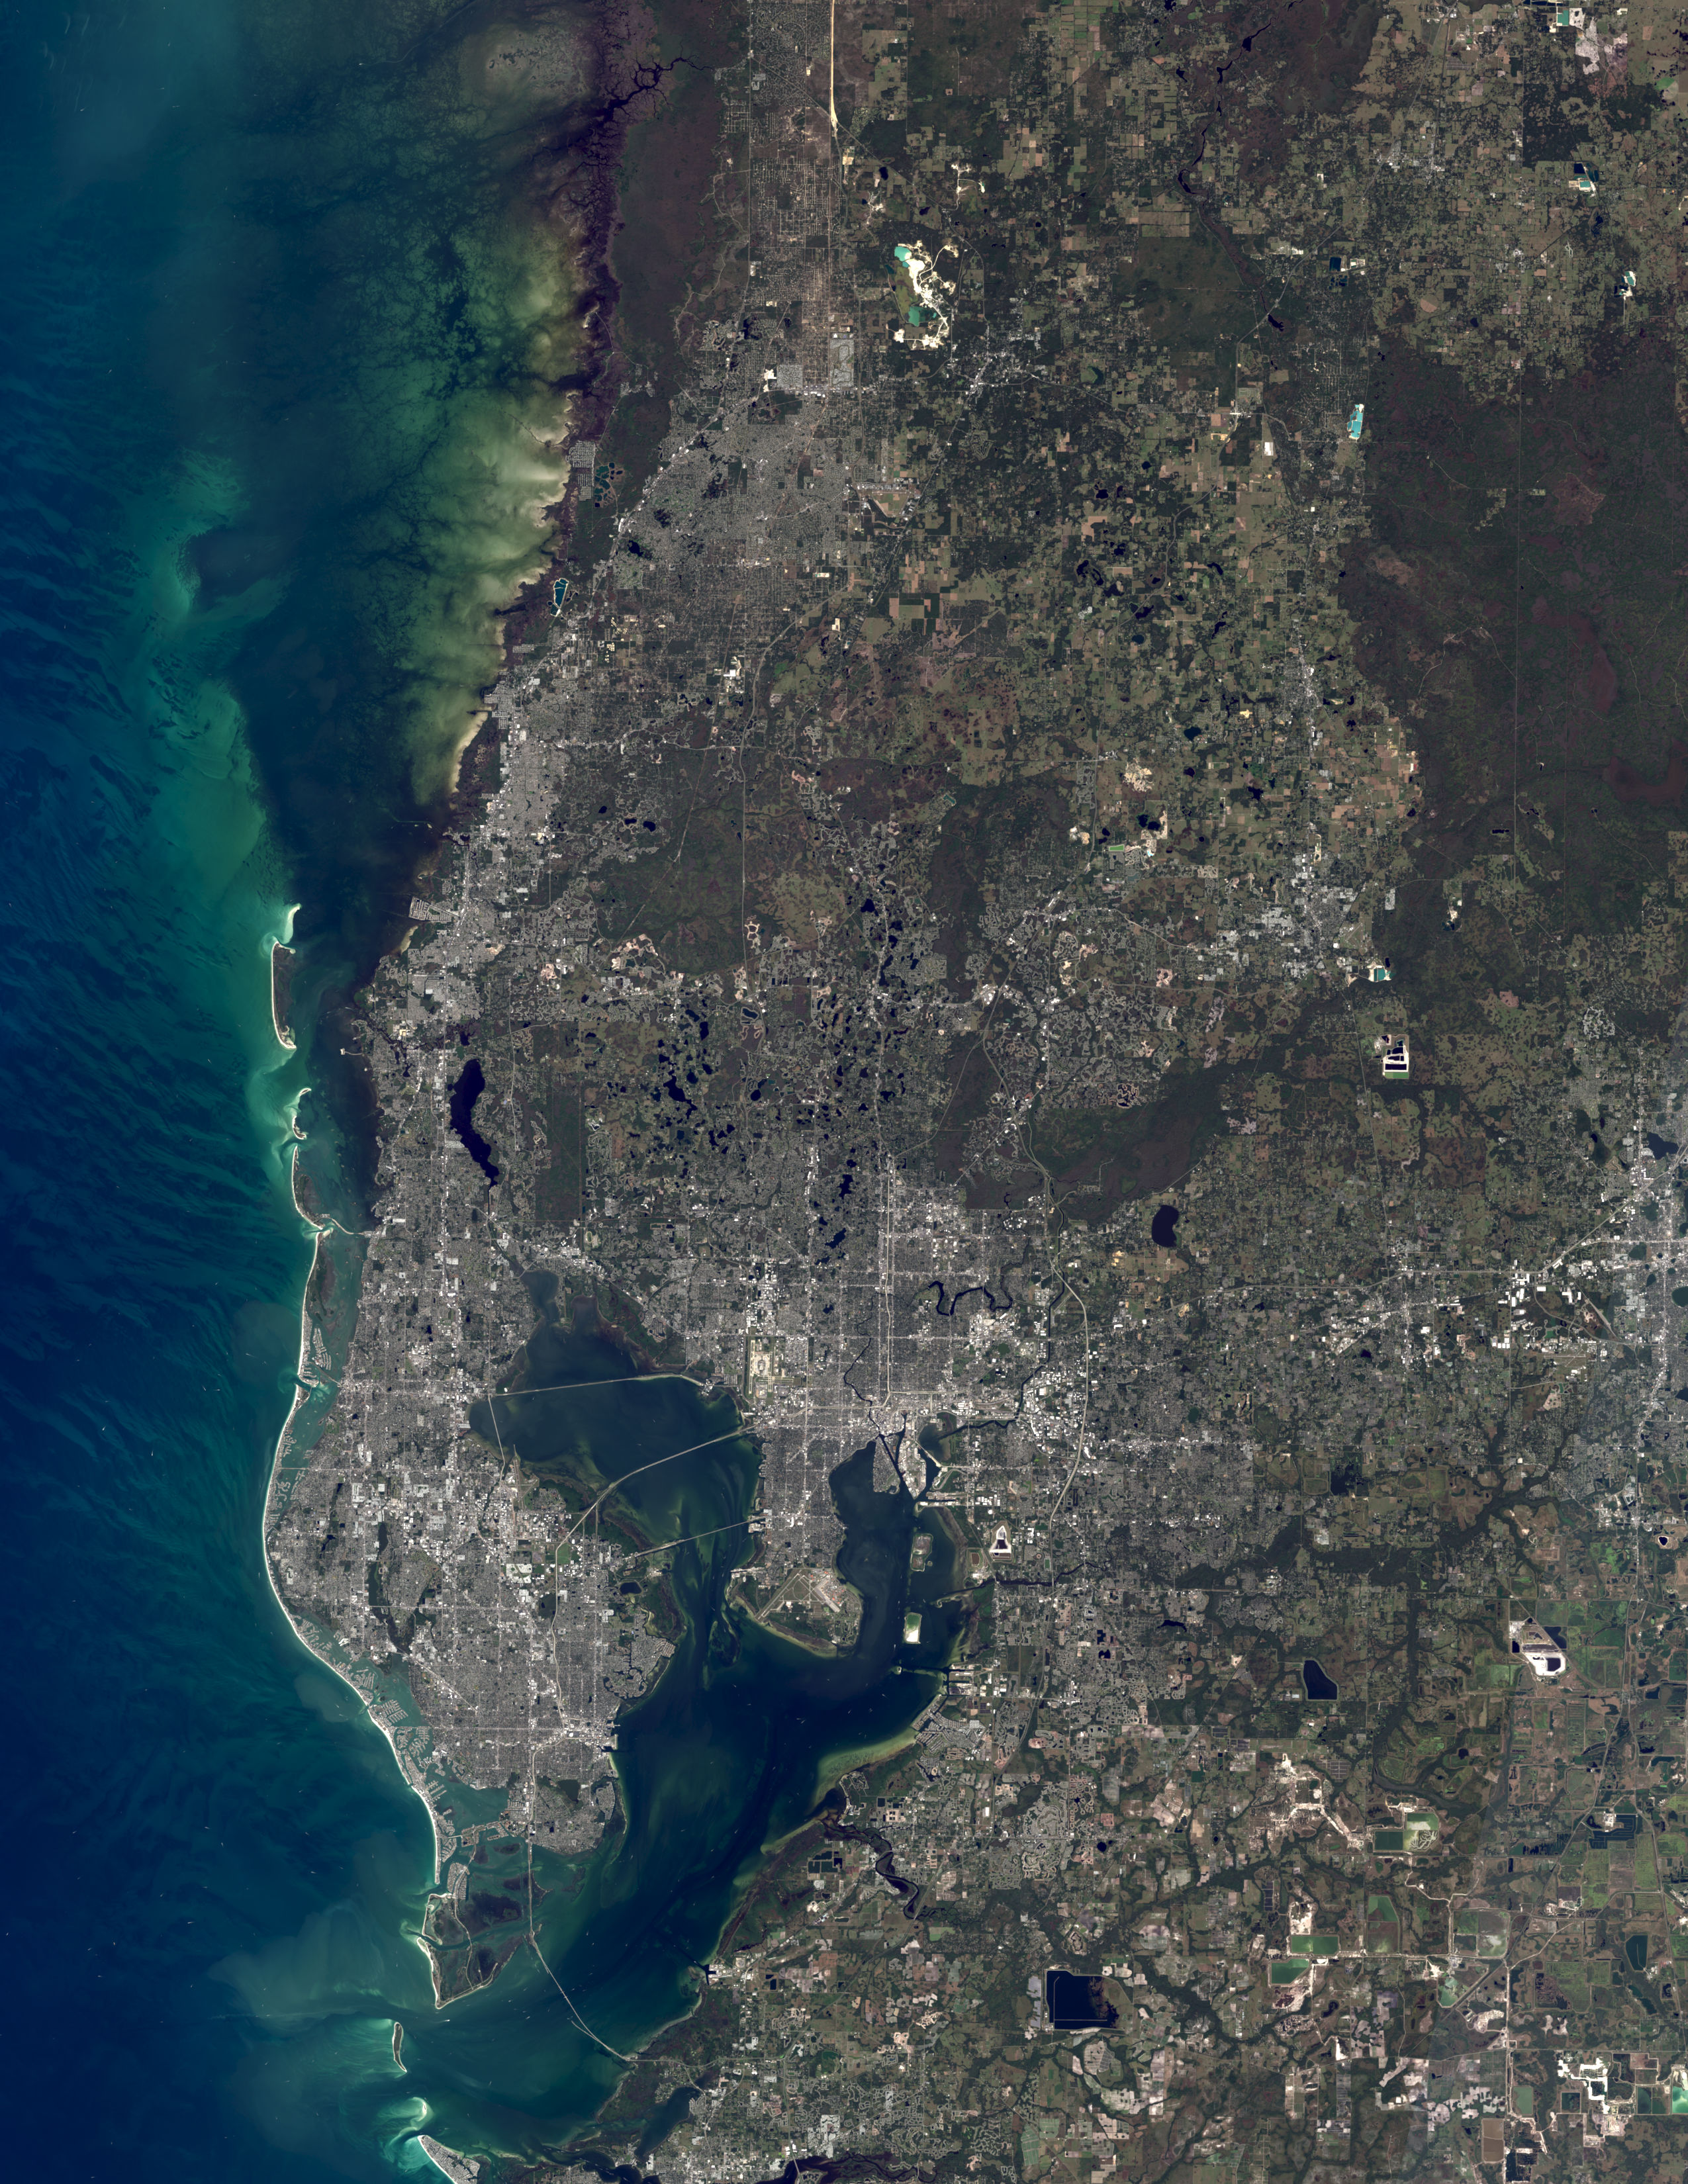 The Tampa Bay area is a major metropolitan area surrounding Tampa Bay on the Gulf Coast of Florida in the United States. It includes the main cities of Tampa, St. Petersburg, and Clearwater. It is the 17th-largest metropolitan area in the United States, with a population of 3,175,275 as of the 2020 U.S. Census.
The exact boundaries of the metro area can differ in different contexts. Hillsborough County and Pinellas County (including the cities of Tampa, St. Petersburg, Clearwater, and various smaller communities) make up the most limited definition. This area includes most of the Tampa Bay bayfront, aside from the far southern portion which lies in Manatee County. The U.S. Office of Management and Budget (OMB) defines the Tampa–St. Petersburg–Clearwater Metropolitan Statistical Area (MSA) as including Hillsborough and Pinellas Counties as well as Hernando and Pasco Counties to the north; and it is the 18th-largest MSA in the country. The MSA was first defined in 1950 as the Tampa-St. Petersburg, Florida Standard Metropolitan Area, and included Hillsborough and Pinellas counties. Pasco County was added to the MSA in 1973. In 1983, Hernando County was added to the MSA and Clearwater was added to the MSA name. The OMB has designated Tampa, St. Petersburg, Clearwater, Largo, and Pinellas Park as the principal cities of the MSA. Unlike most large metropolitan areas, Tampa does not belong to any combined statistical area and is the largest MSA in the United States not to belong to one.
Other definitions of the Tampa Bay area include:

The four counties in the MSA plus Citrus and Manatee Counties, used by the Tampa Bay Regional Planning Council
The four counties in the MSA plus Citrus, Manatee and Sarasota Counties, used by the Tampa Bay Area Regional Transportation Authority
The four counties in the MSA plus Citrus, Manatee, Sarasota and Polk Counties, used by the Tampa Bay Partnership and the Tampa Bay media market.This wider area may also be known as West Central Florida as part of Central Florida.

